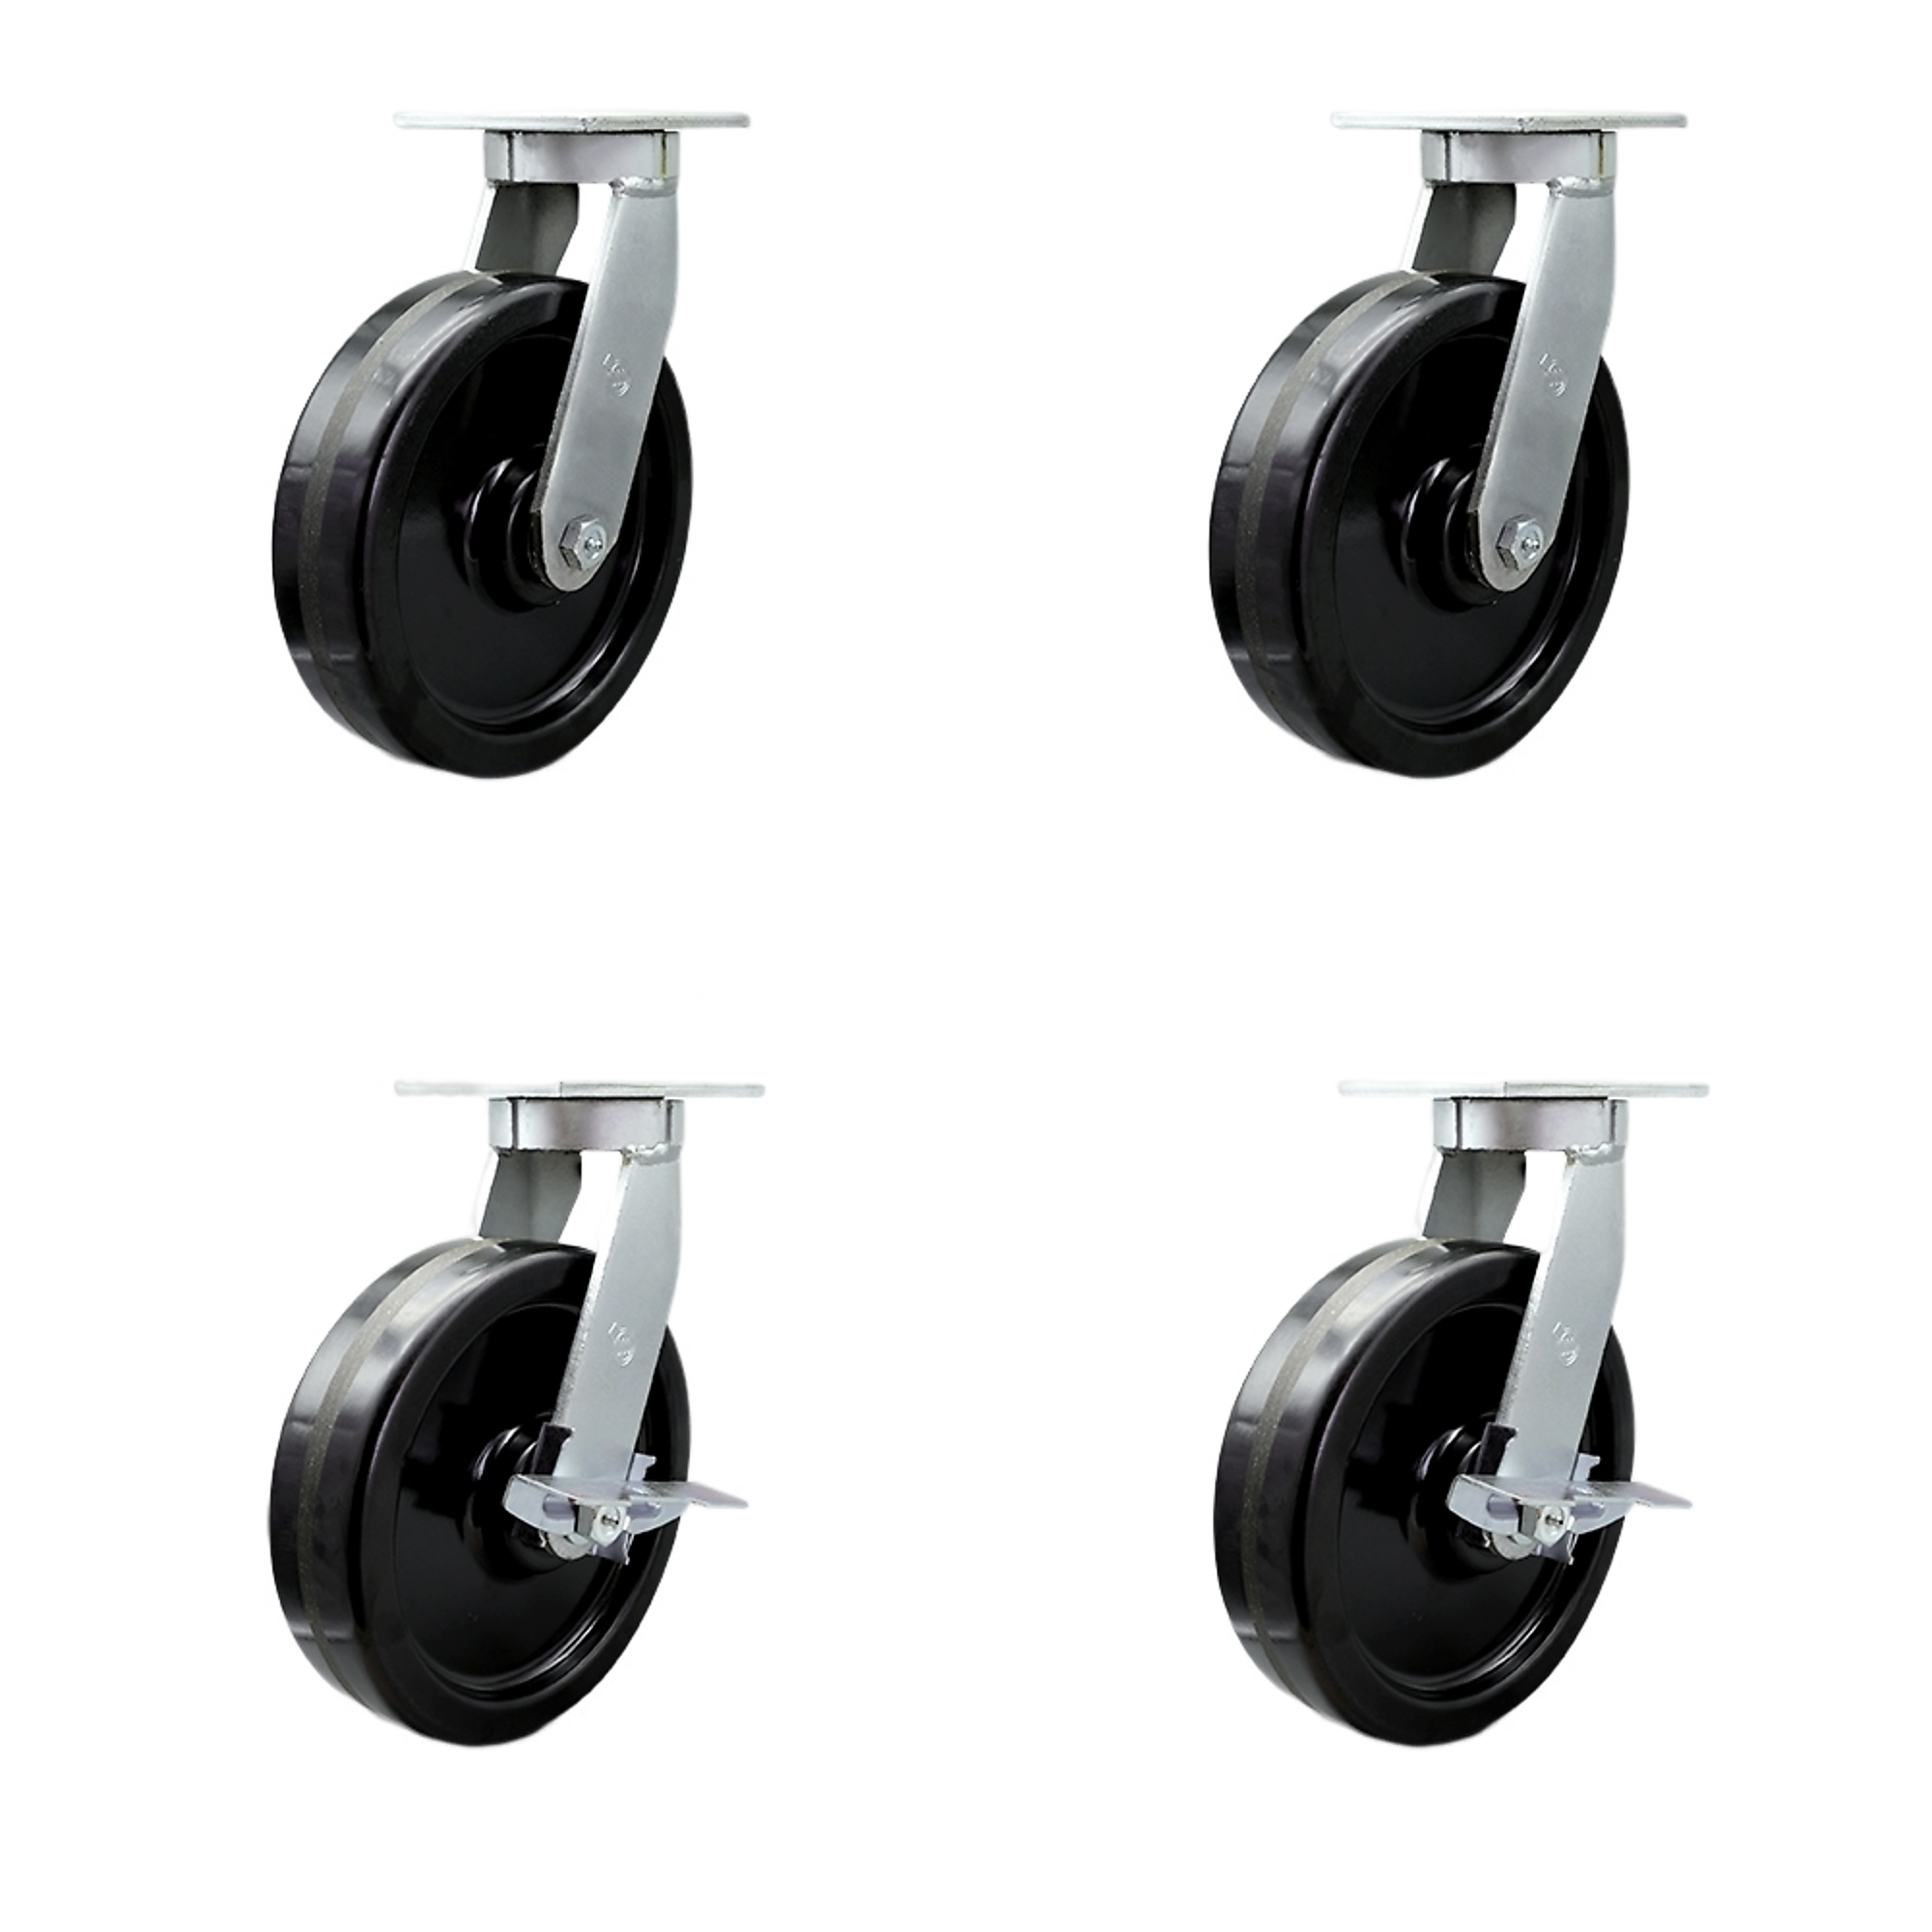 Service Caster, 10Inch x 3Inch Plate Casters, Wheel Diameter 10 in, Caster Type Swivel, Package (qty.) 4, Model SCC-KP92S1030-PHR-2-SLB-2